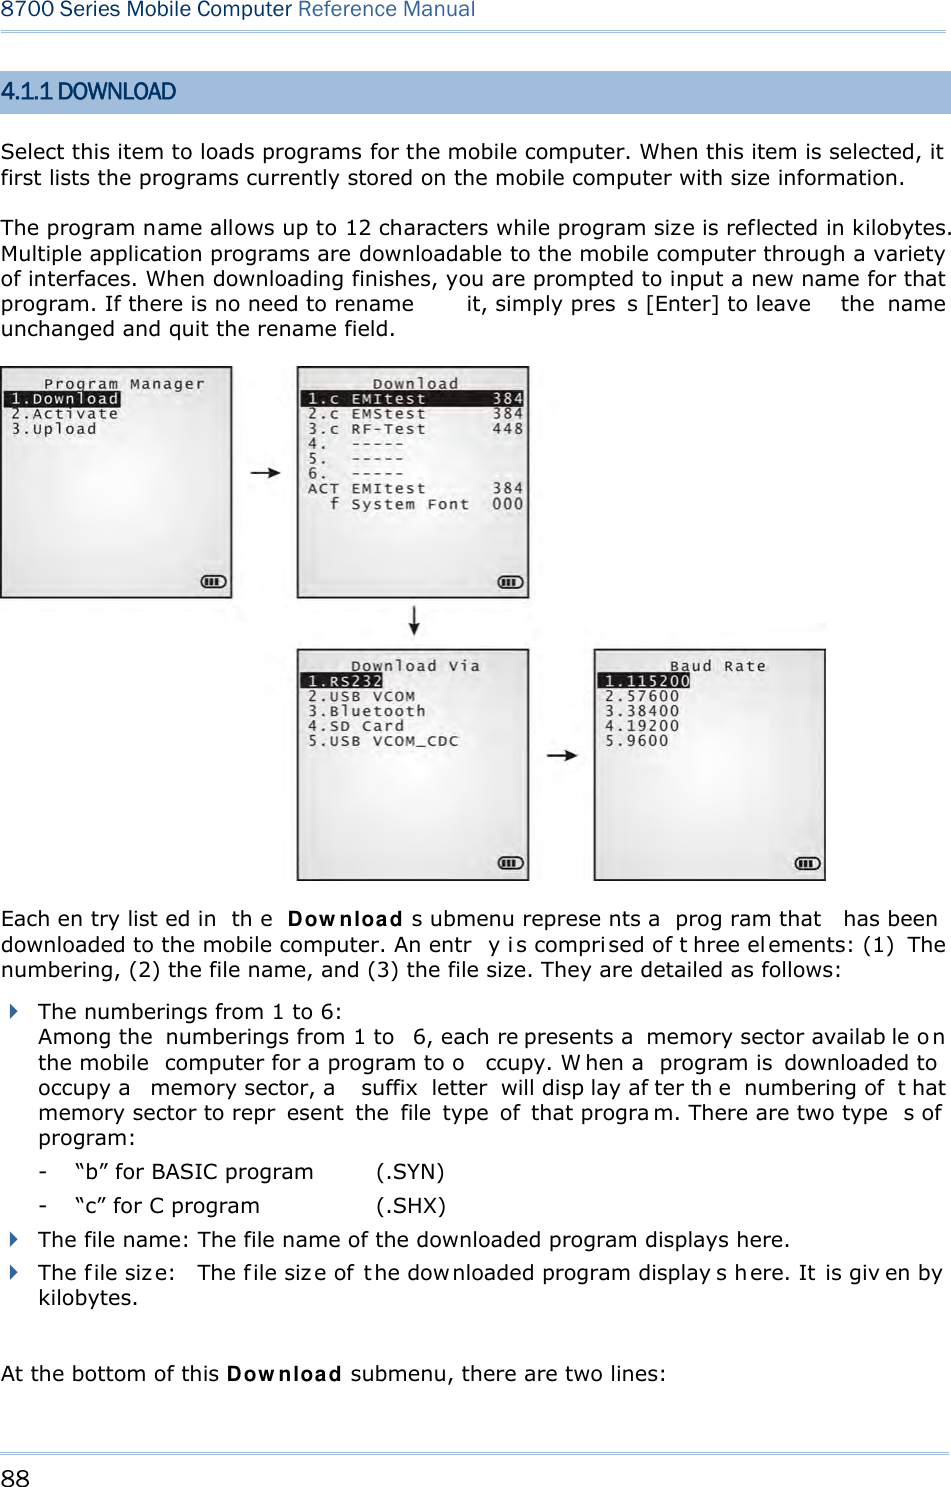 88  8700 Series Mobile Computer Reference Manual  4.1.1 DOWNLOAD Select this item to loads programs for the mobile computer. When this item is selected, it first lists the programs currently stored on the mobile computer with size information. The program name allows up to 12 characters while program size is reflected in kilobytes. Multiple application programs are downloadable to the mobile computer through a variety of interfaces. When downloading finishes, you are prompted to input a new name for that program. If there is no need to rename  it, simply pres s [Enter] to leave  the name unchanged and quit the rename field.  Each en try list ed in  th e Download s ubmenu represe nts a  prog ram that  has been  downloaded to the mobile computer. An entr y i s compri sed of t hree el ements: (1)  The numbering, (2) the file name, and (3) the file size. They are detailed as follows:  The numberings from 1 to 6: Among the  numberings from 1 to  6, each re presents a  memory sector availab le o n the mobile  computer for a program to o ccupy. W hen a  program is  downloaded to  occupy a  memory sector, a  suffix letter will disp lay af ter th e numbering of  t hat memory sector to repr esent the file type of that progra m. There are two type s of  program: -  “b” for BASIC program  (.SYN) -  “c” for C program    (.SHX)  The file name: The file name of the downloaded program displays here.  The f ile siz e:  The f ile siz e of  t he dow nloaded program display s h ere. It  is giv en by  kilobytes.  At the bottom of this Download submenu, there are two lines: 